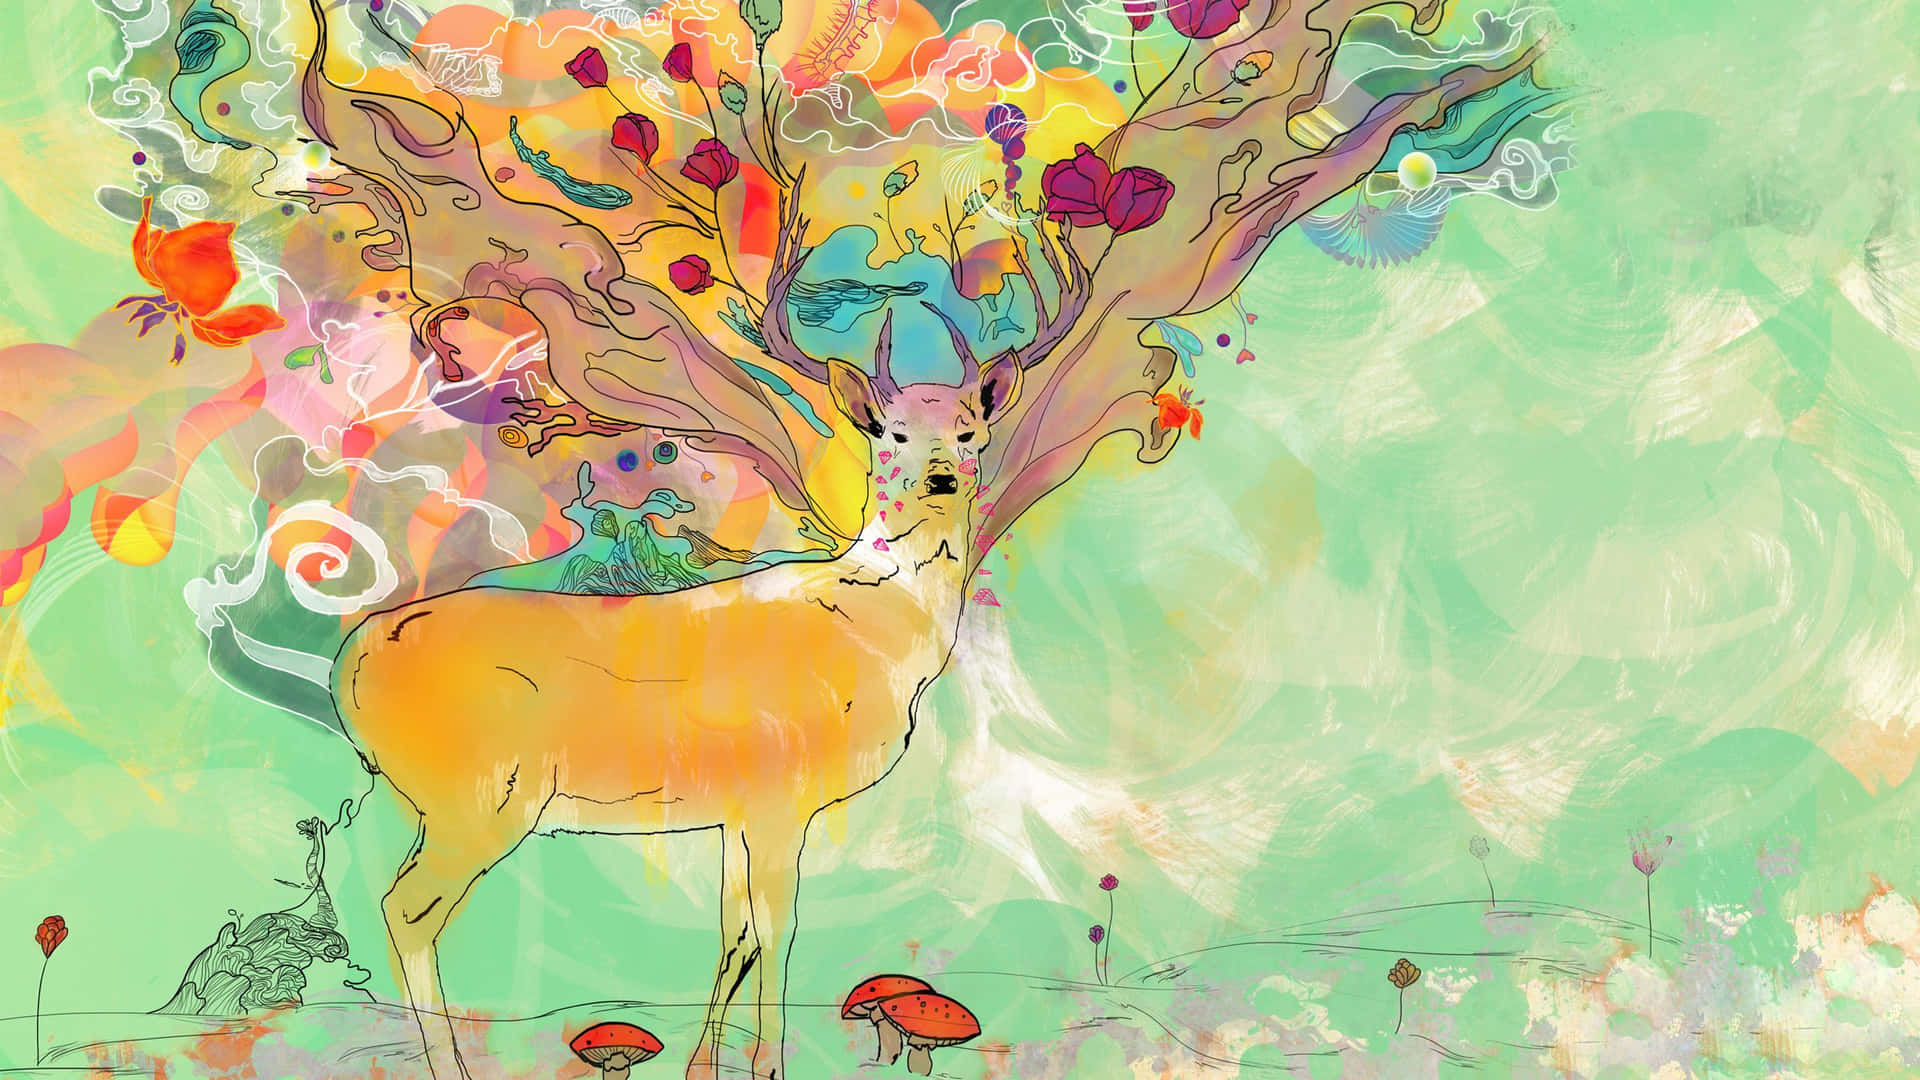 Exceptional Fusion of Wildlife and Psychedelic Art. Wallpaper